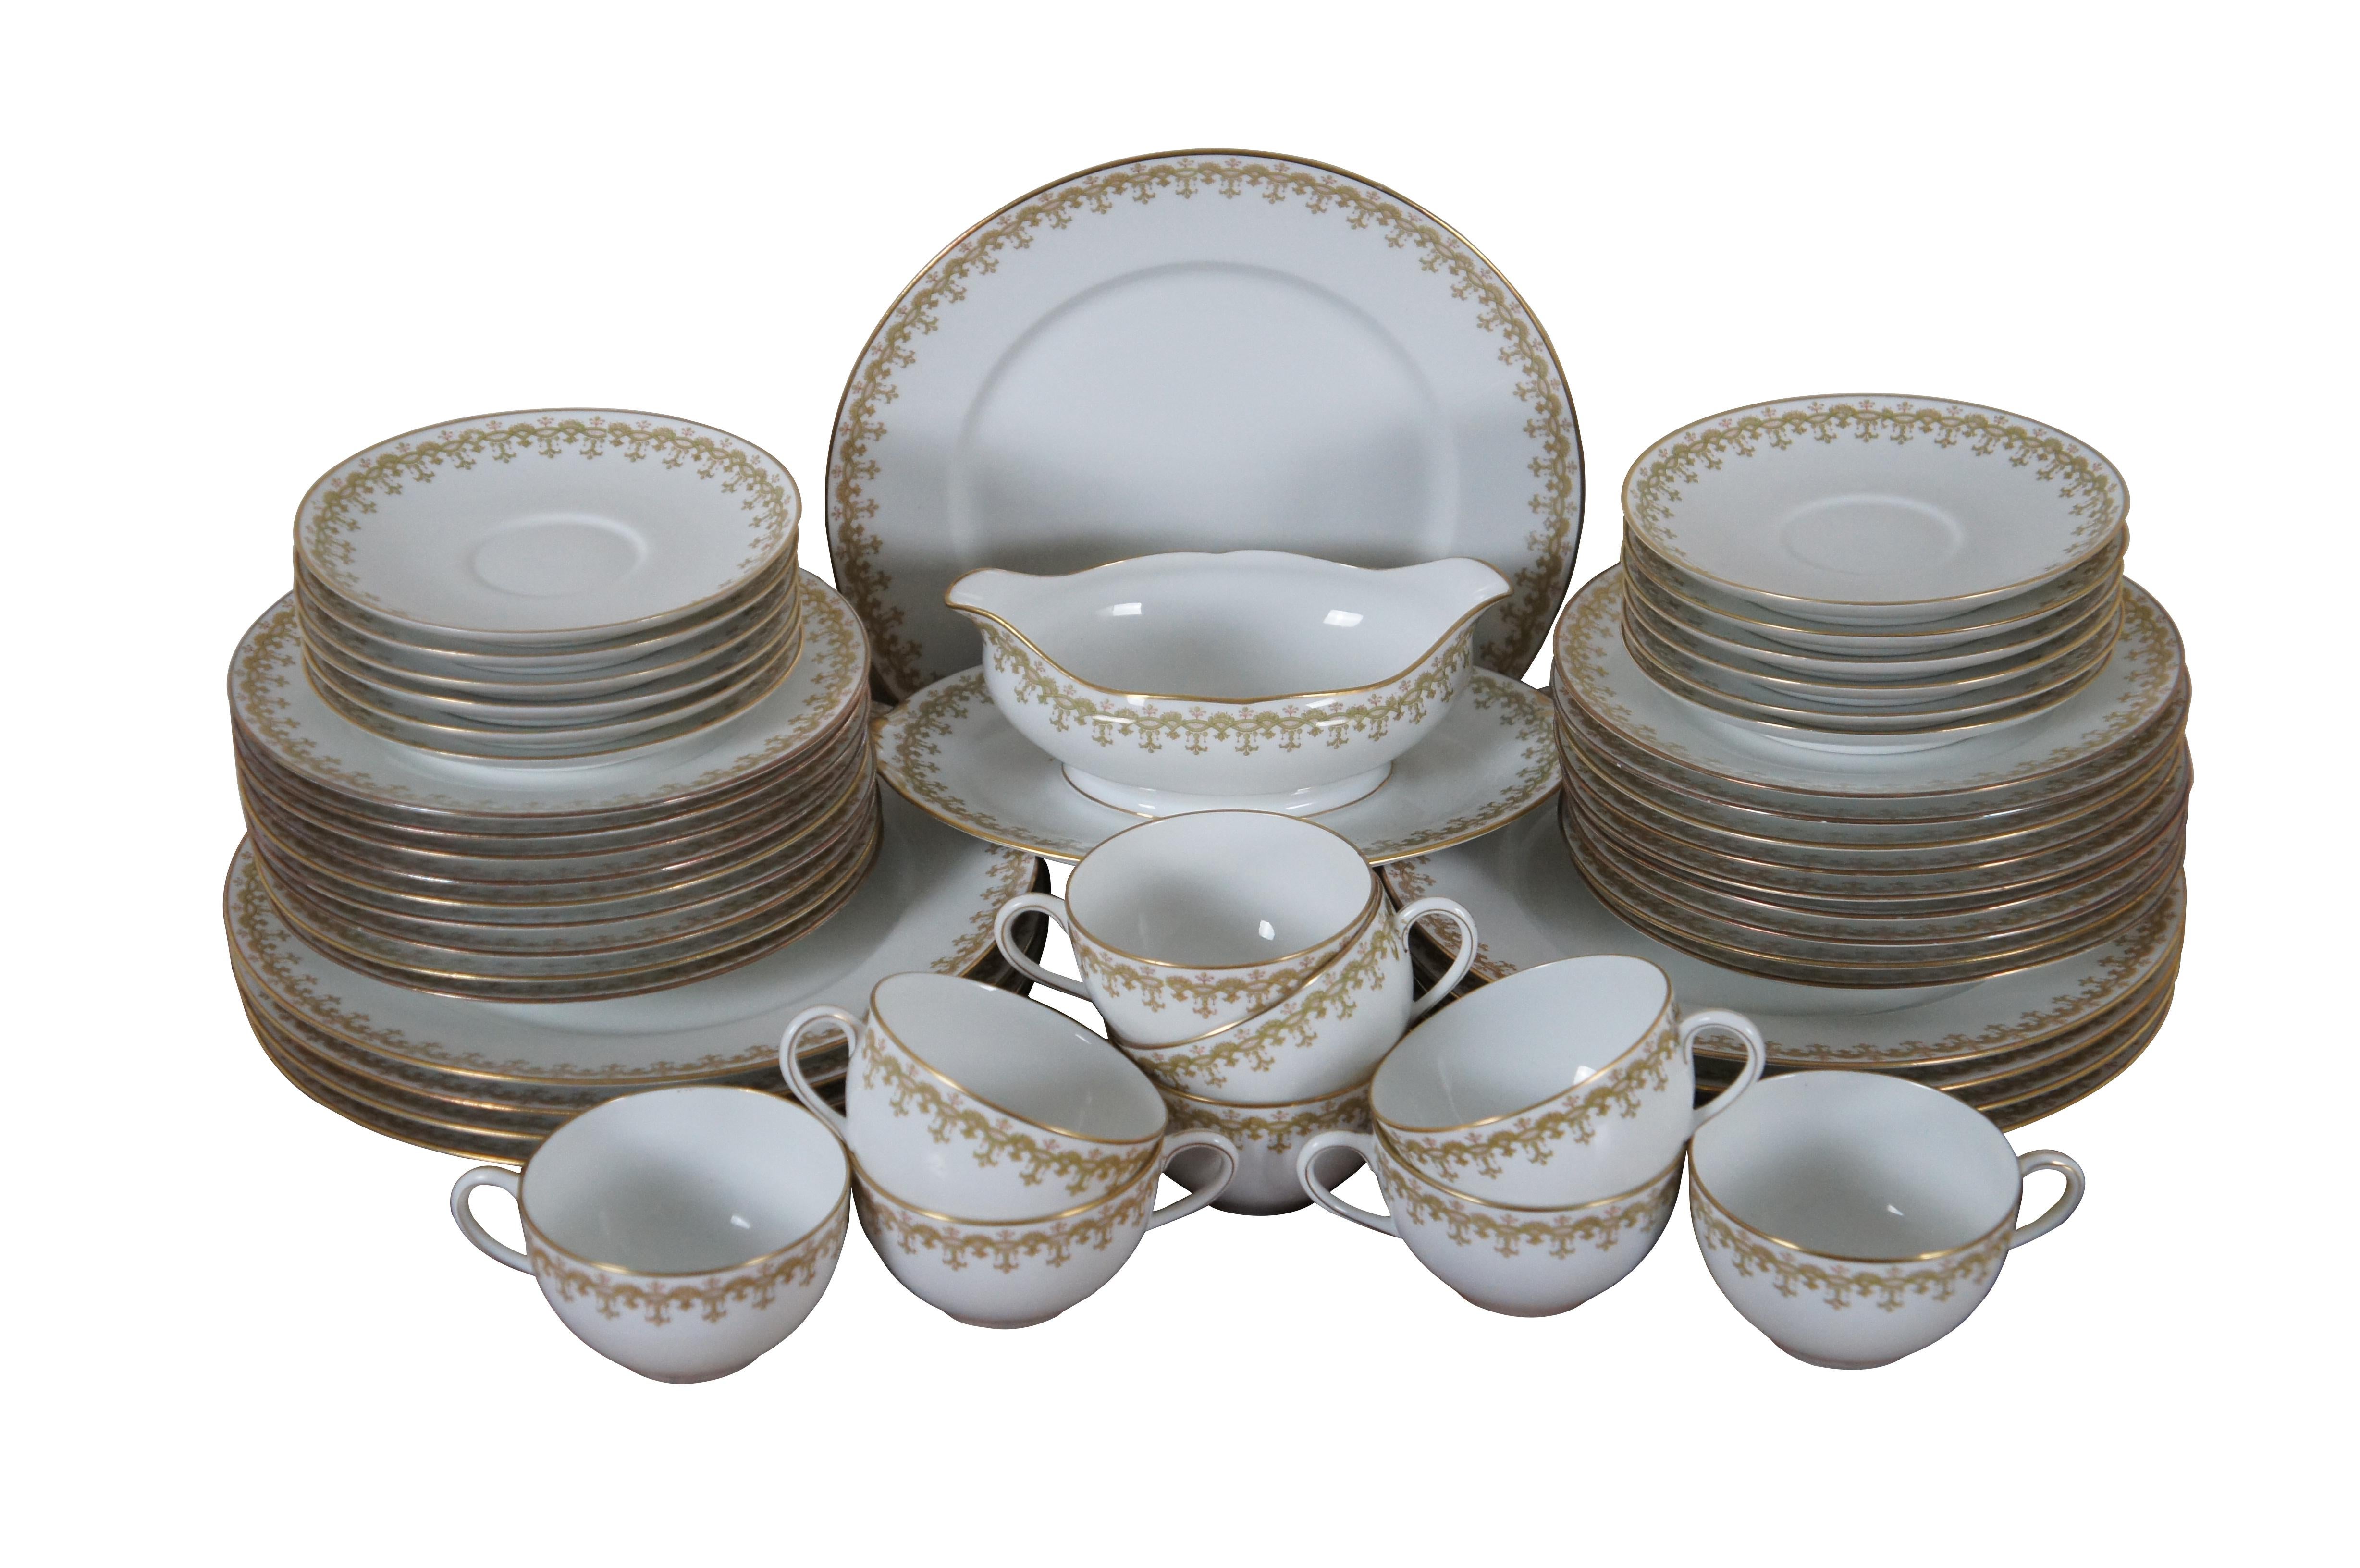 49 piece partial set of Limoges porcelain dinnerware by Charles Ahrenfeldt featuring gilded edges and a printed patterned border of interlocking swags in a light golden-green. Marks used from circa 1894-1930’s.

